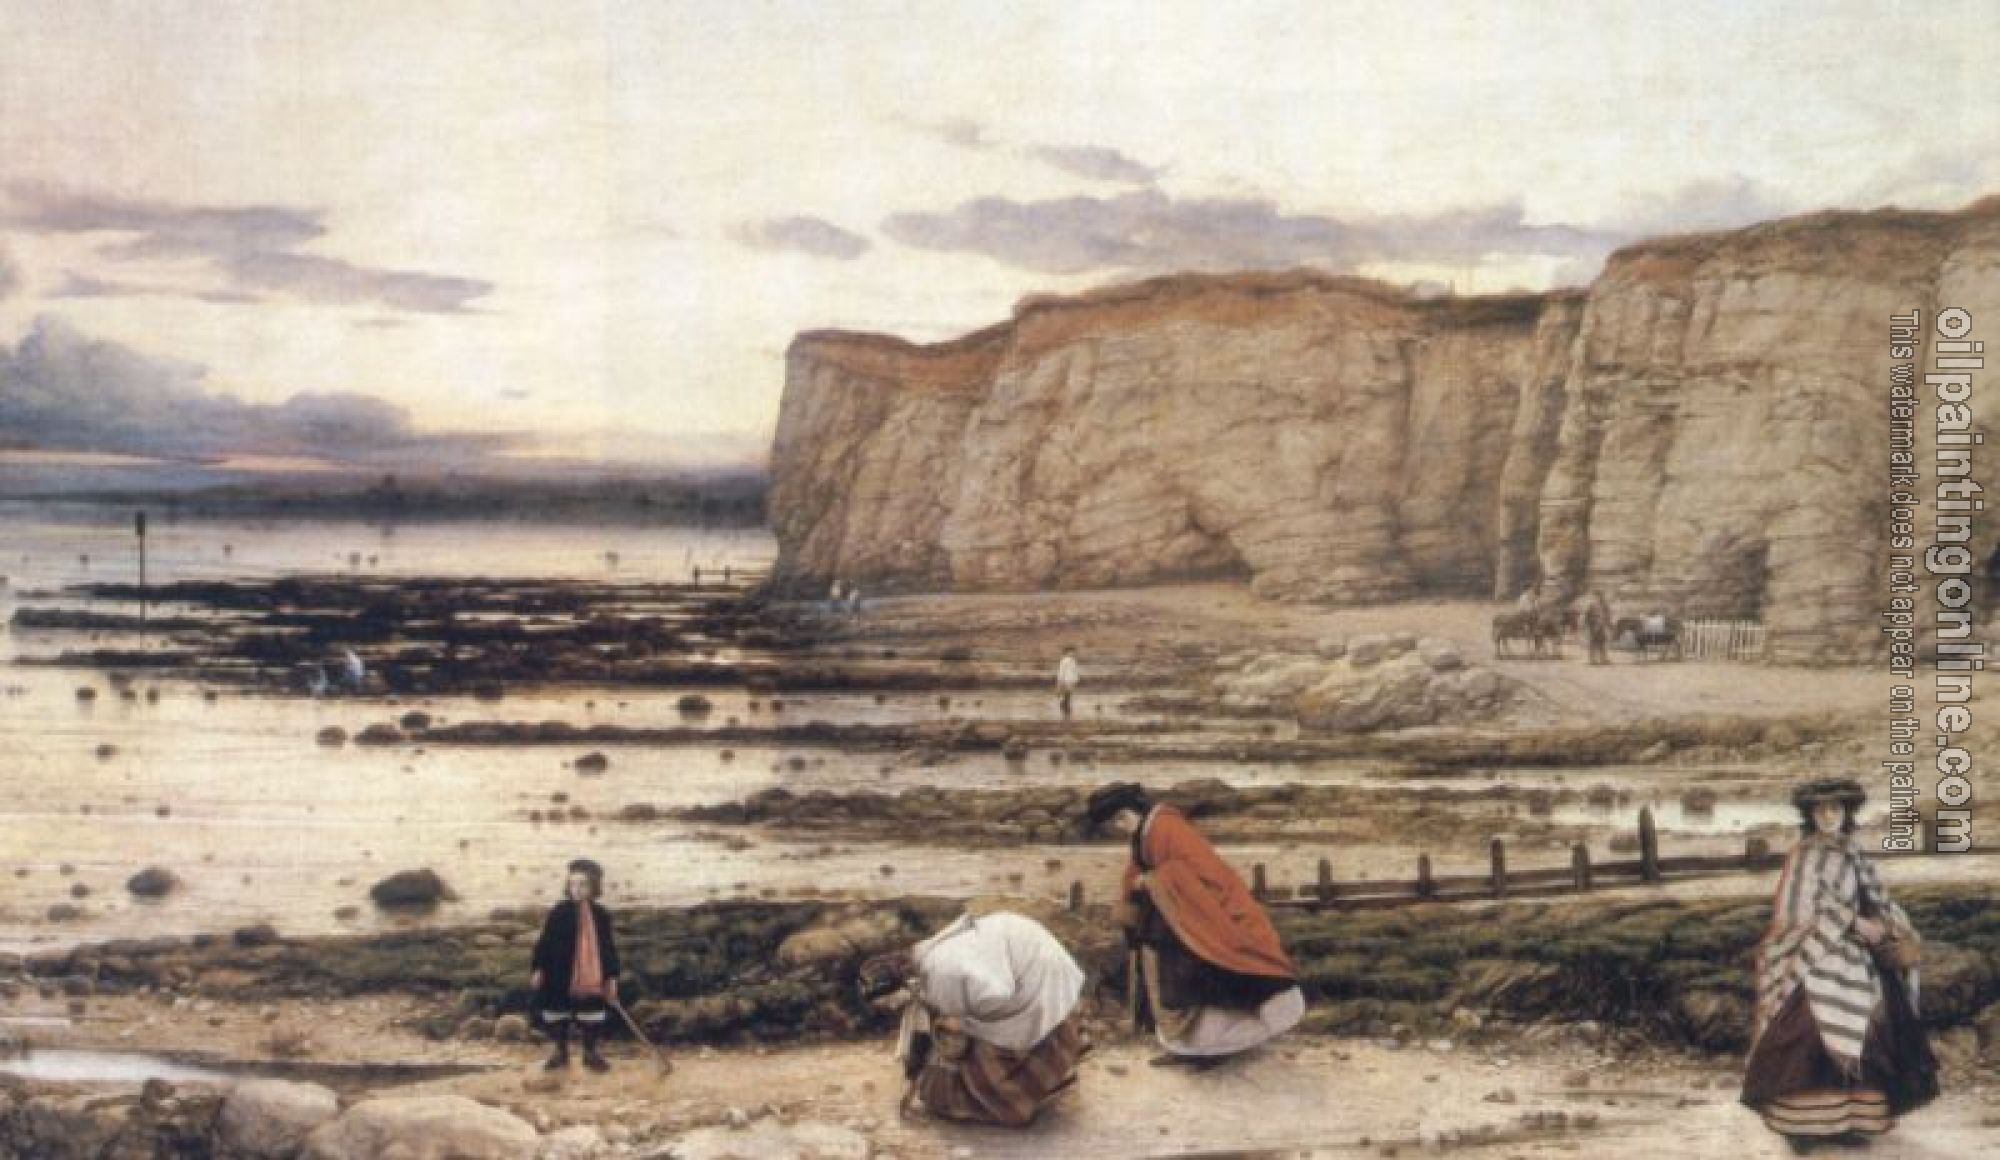 William Dyce - Recollection of Pegwell Bay